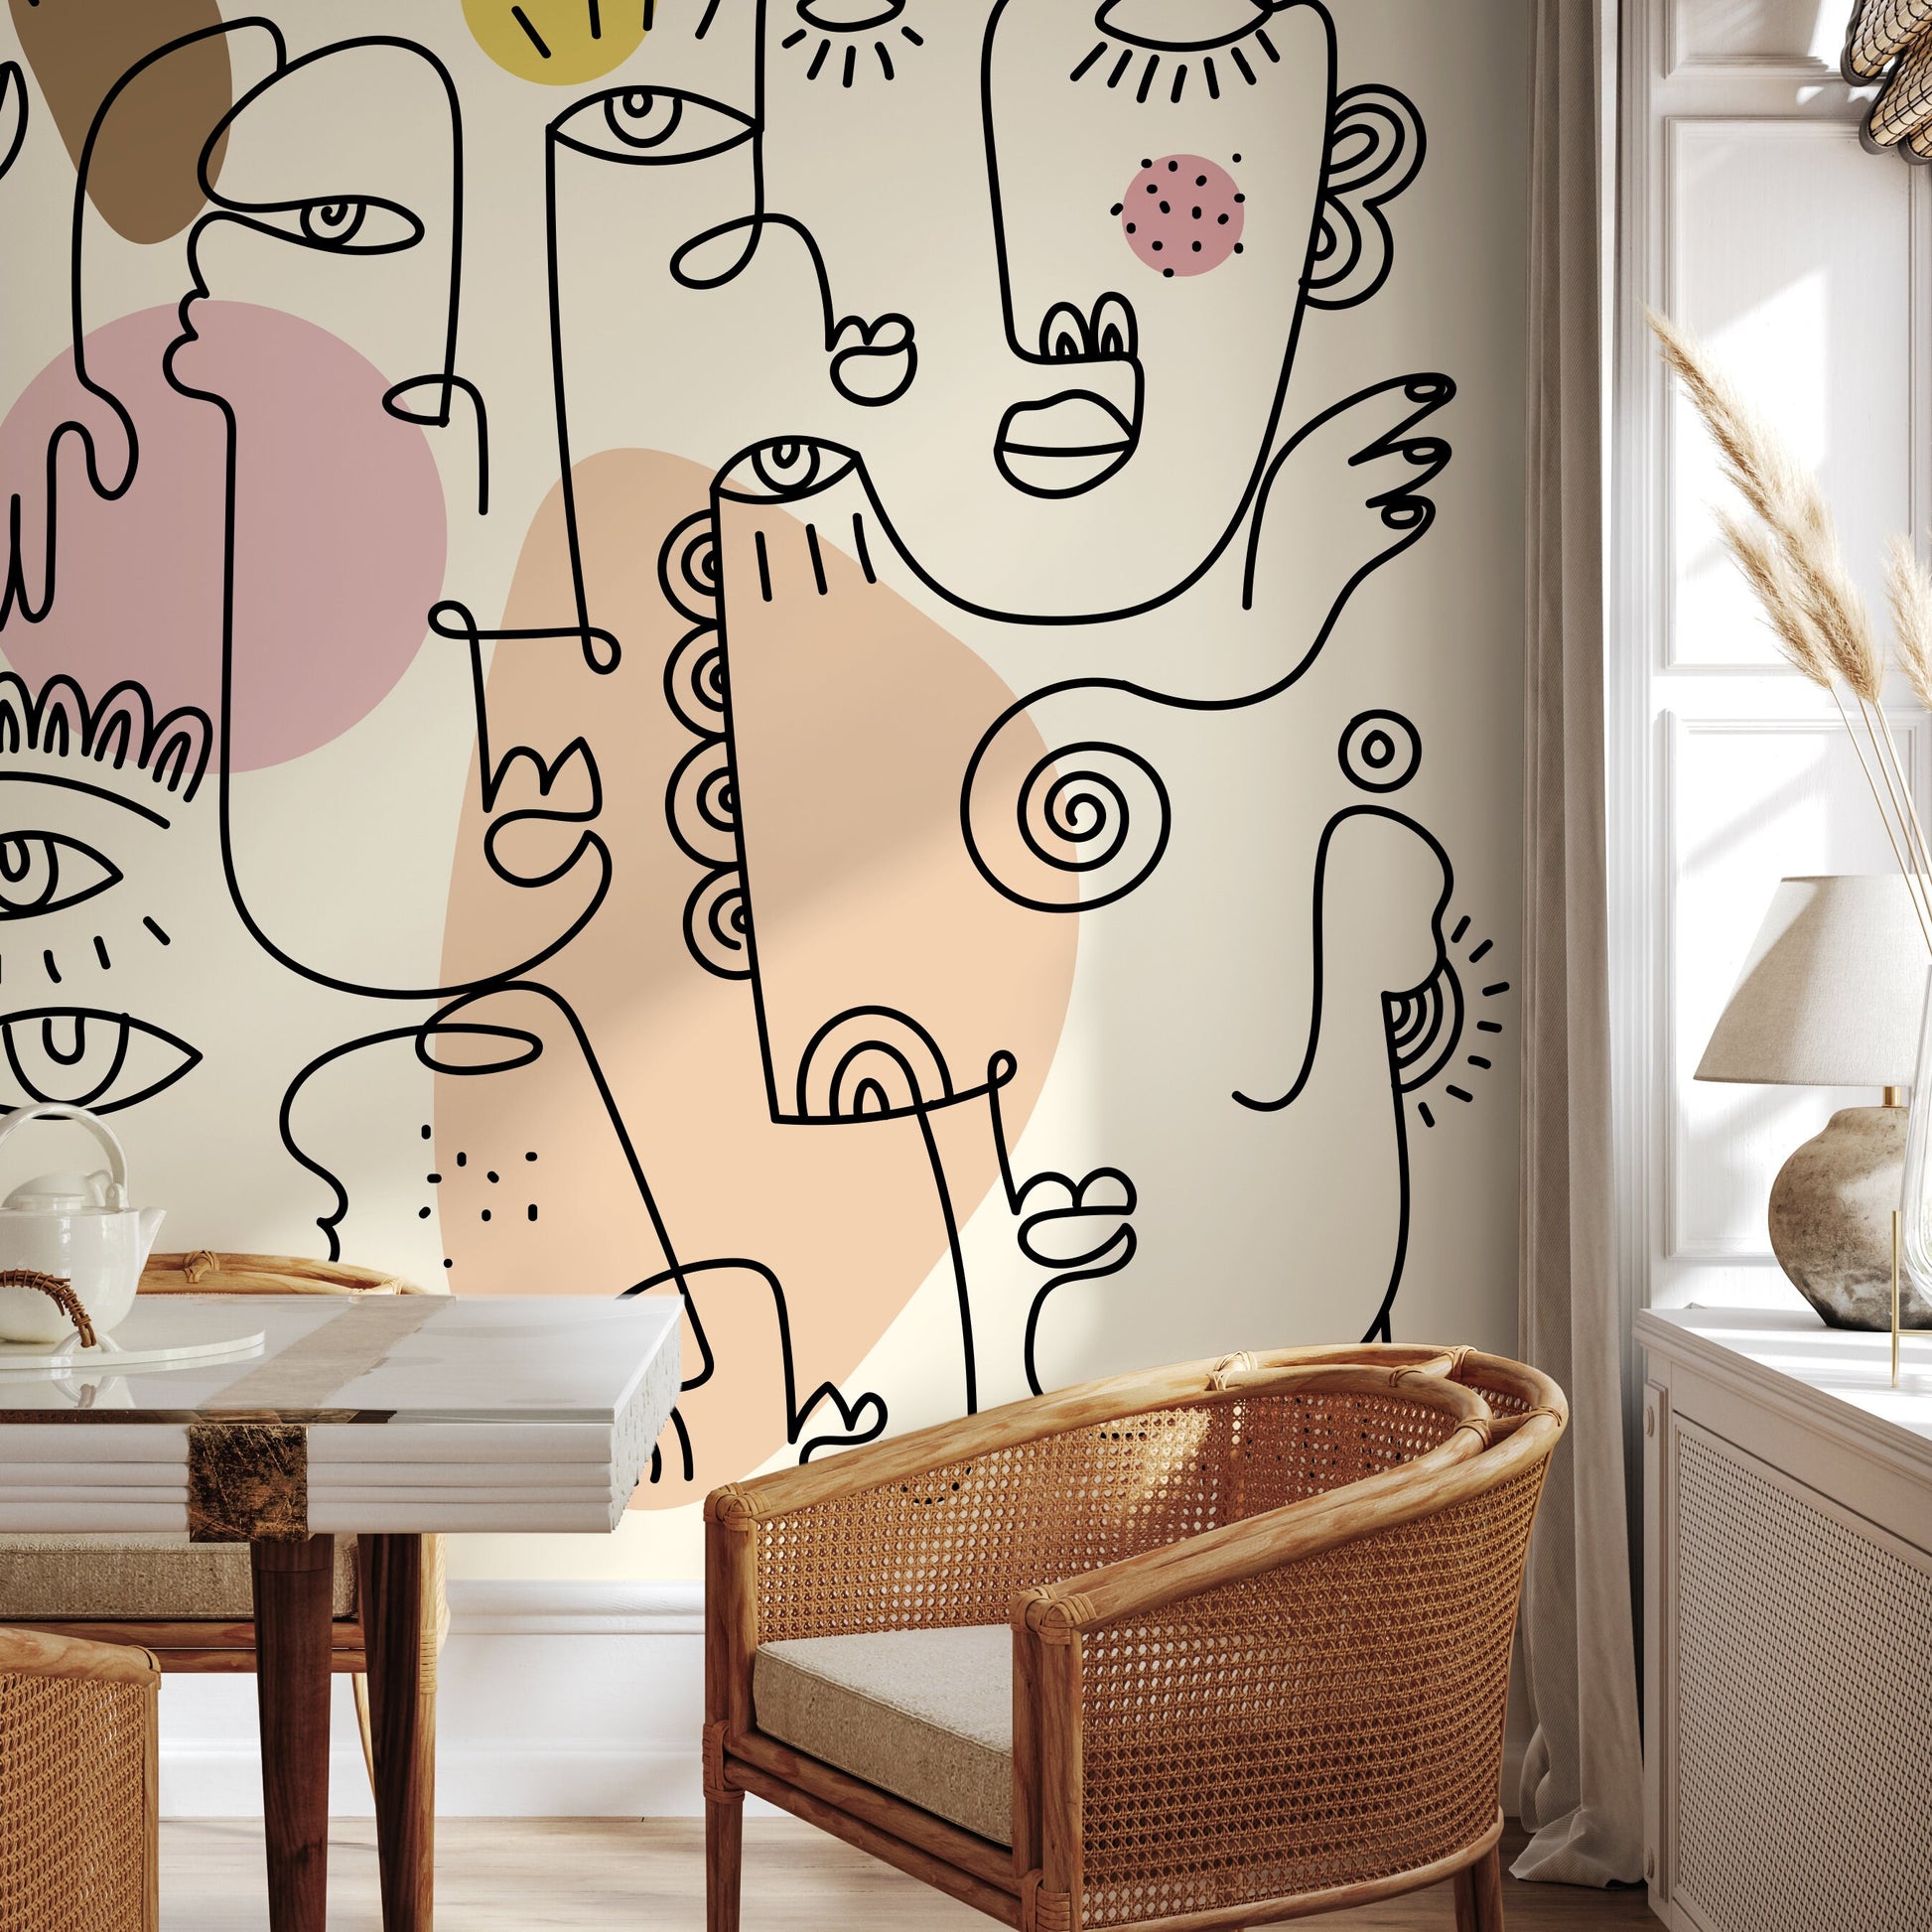 Abstract Faces Mural Modern Wallpaper Peel and Stick Wallpaper Home Decor - D600